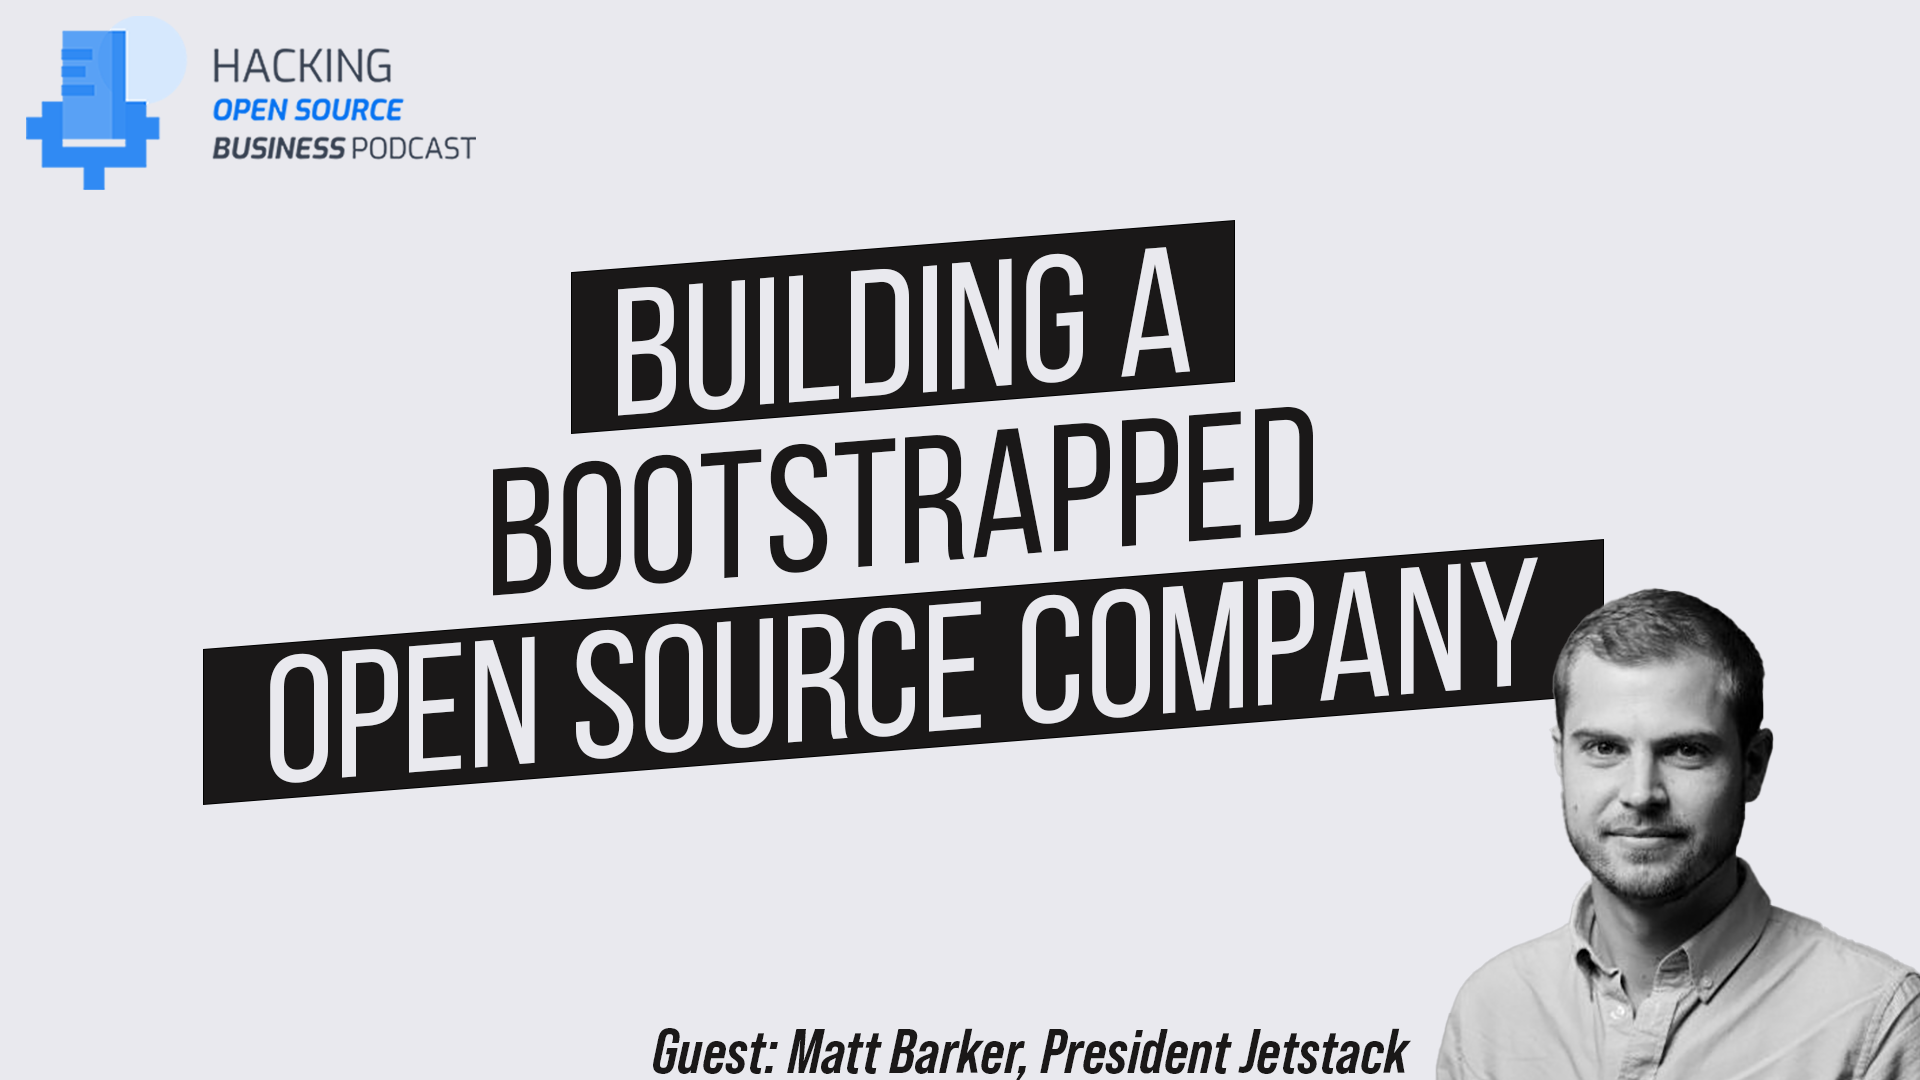 Building a Bootstrapped Open Source Company: Insights from Jetstack Founder & President, Matt Barker